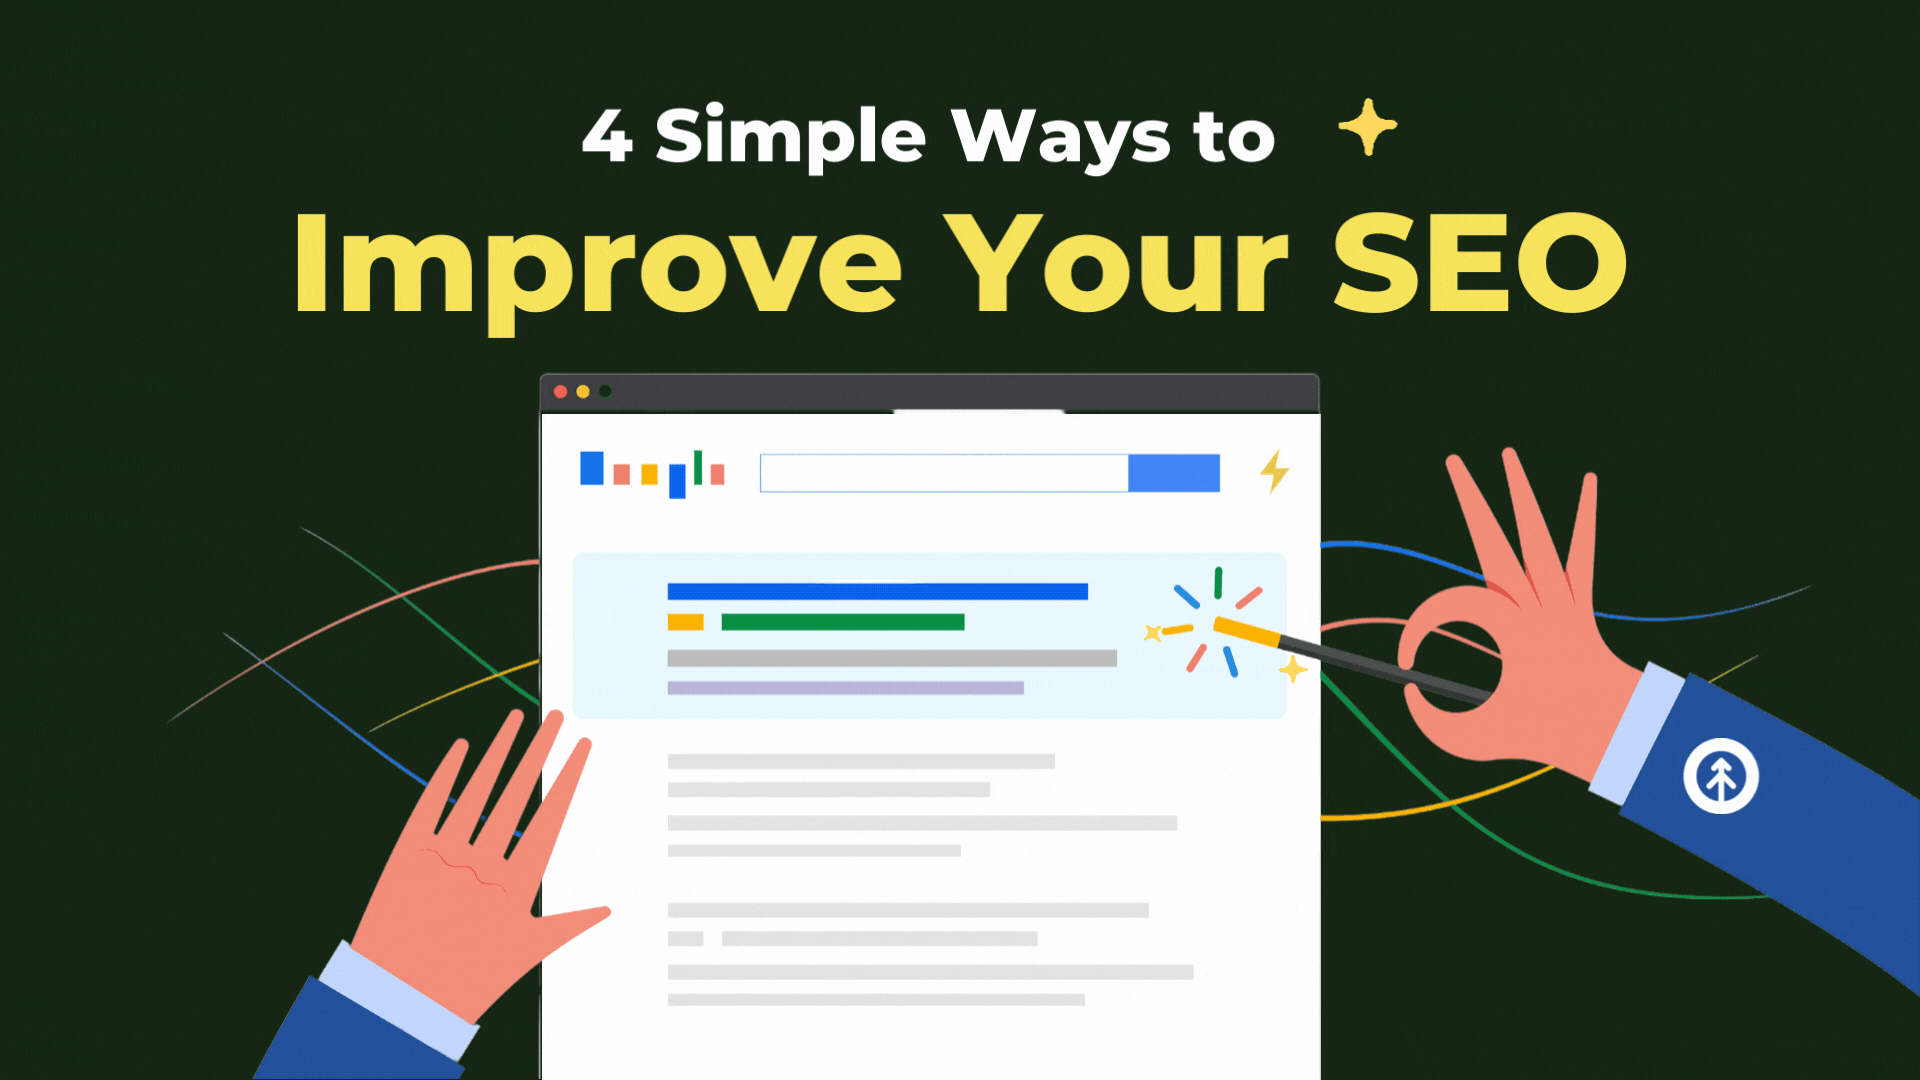 4 Simple Ways to Improve Your SEO